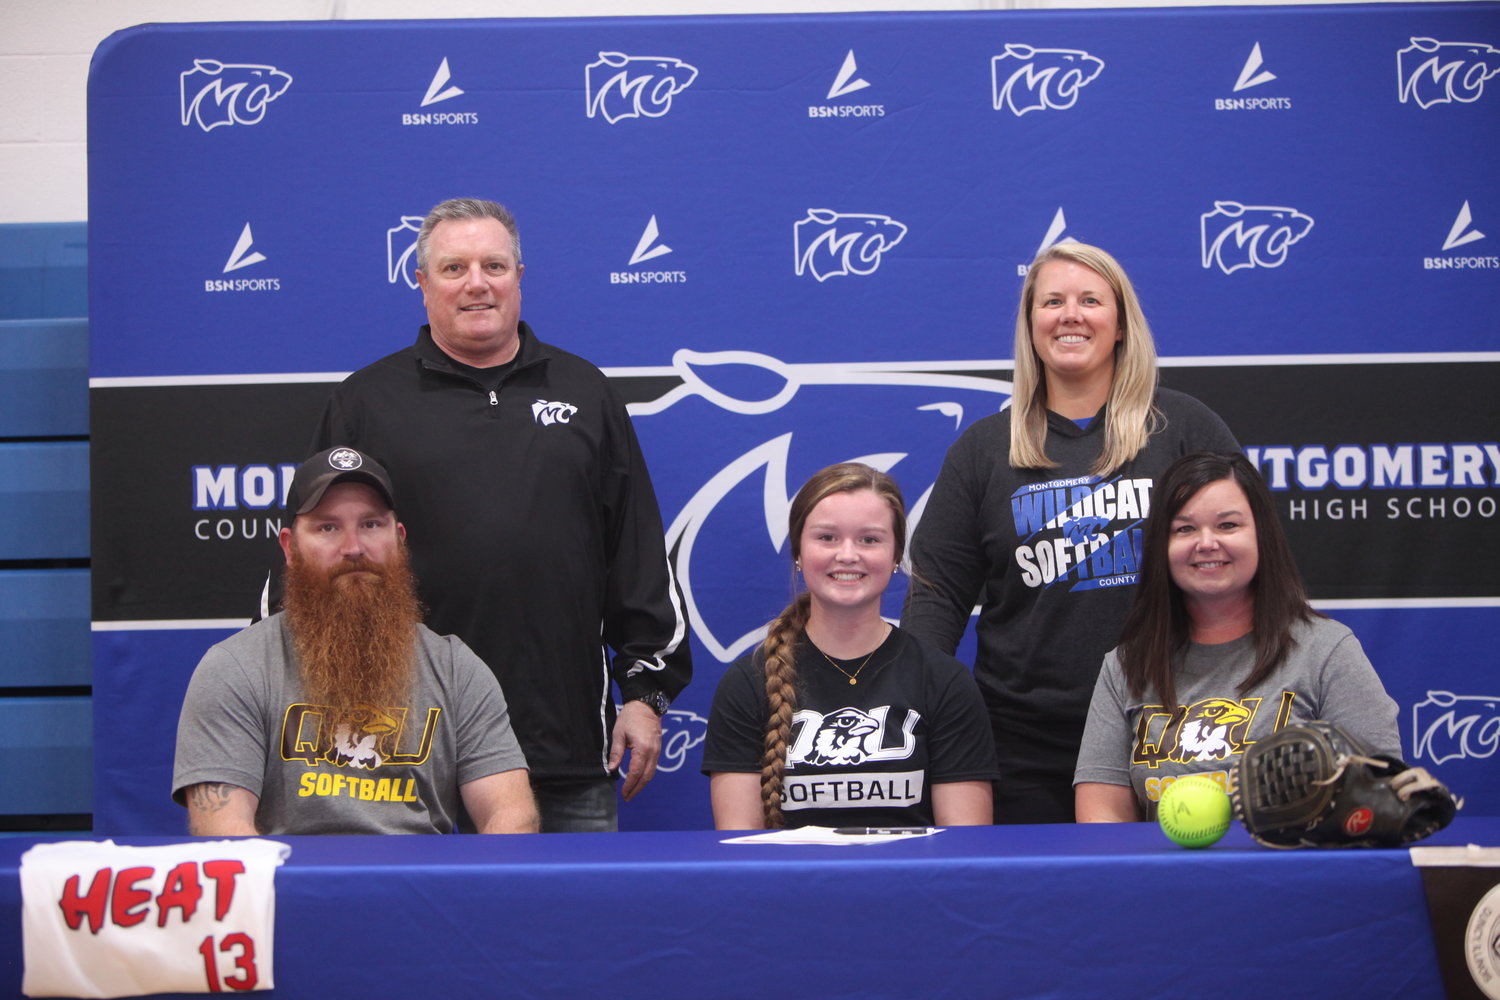 Montgomery County senior Brooklynn Fischer signed a letter of intent to play softball for Quincy University on Nov. 12. Pictured, front row from left, are father Rick Fischer, Brooklynn Fischer and mother Lacy Fischer. Back row are MCHS assistant coach Don Moultrie and head coach Audra Heimer.